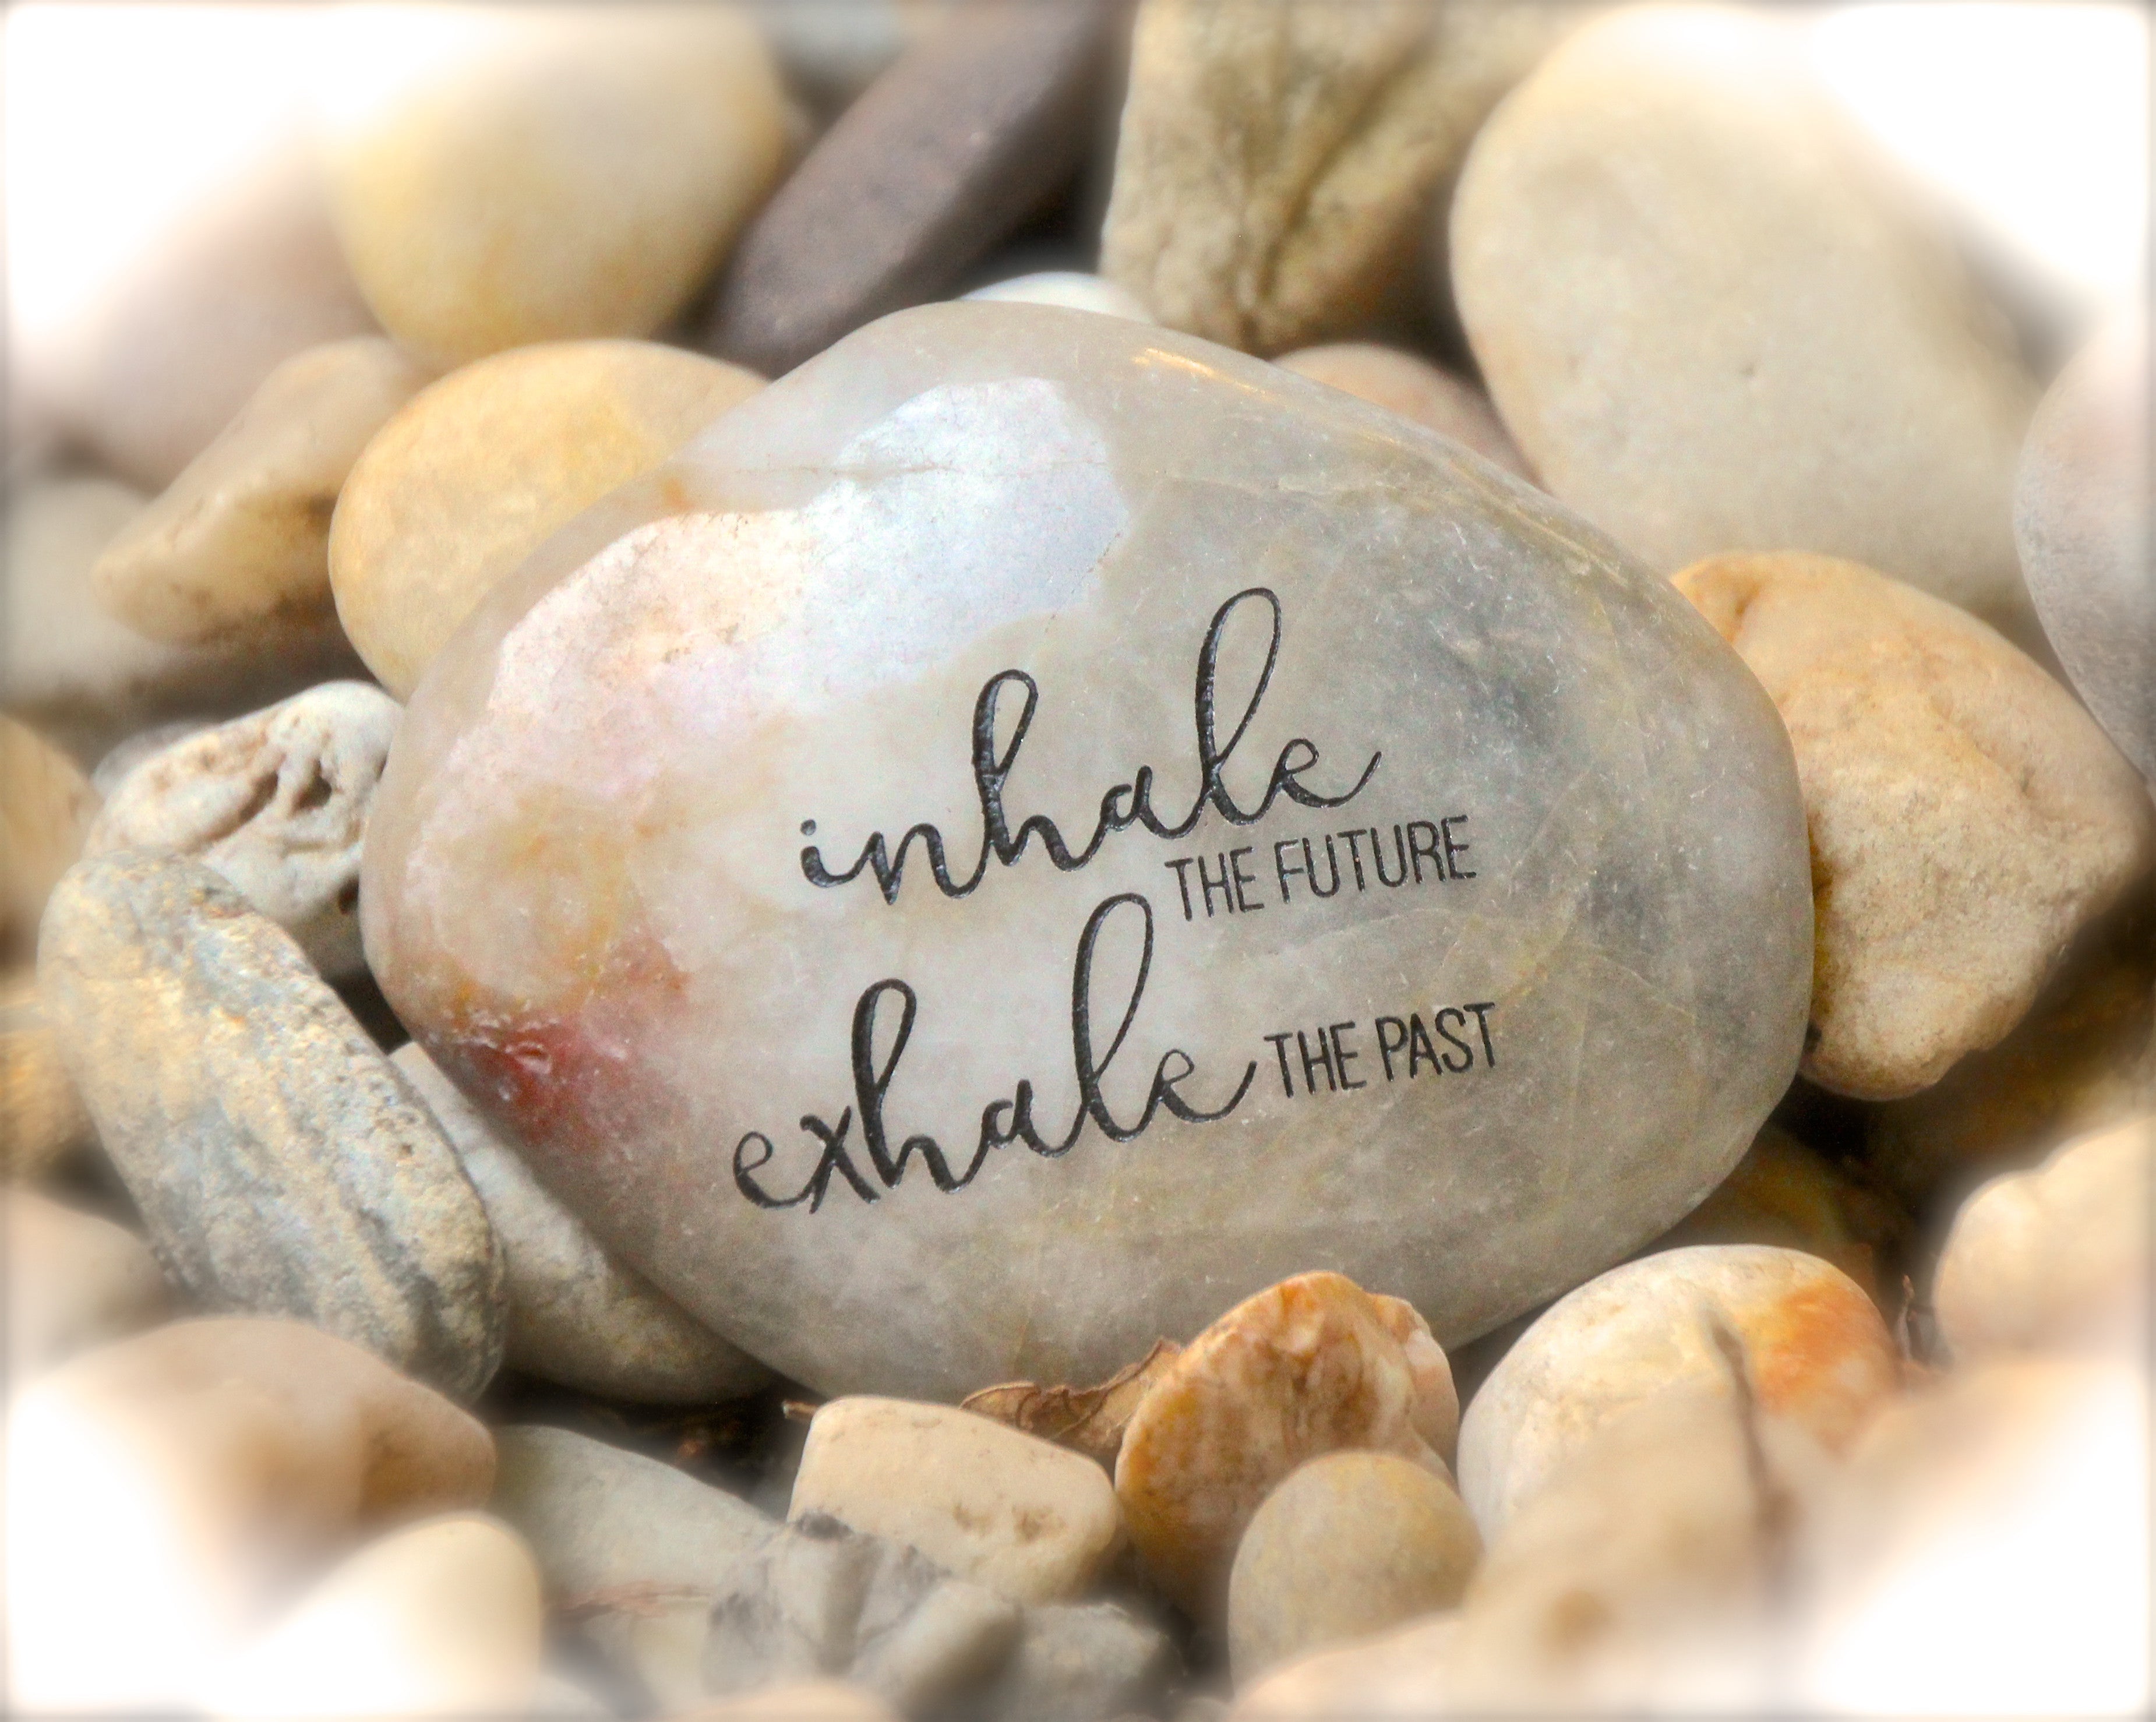 Inhale_the_future_exhale_the_past_engraved_rock_karmic_stones